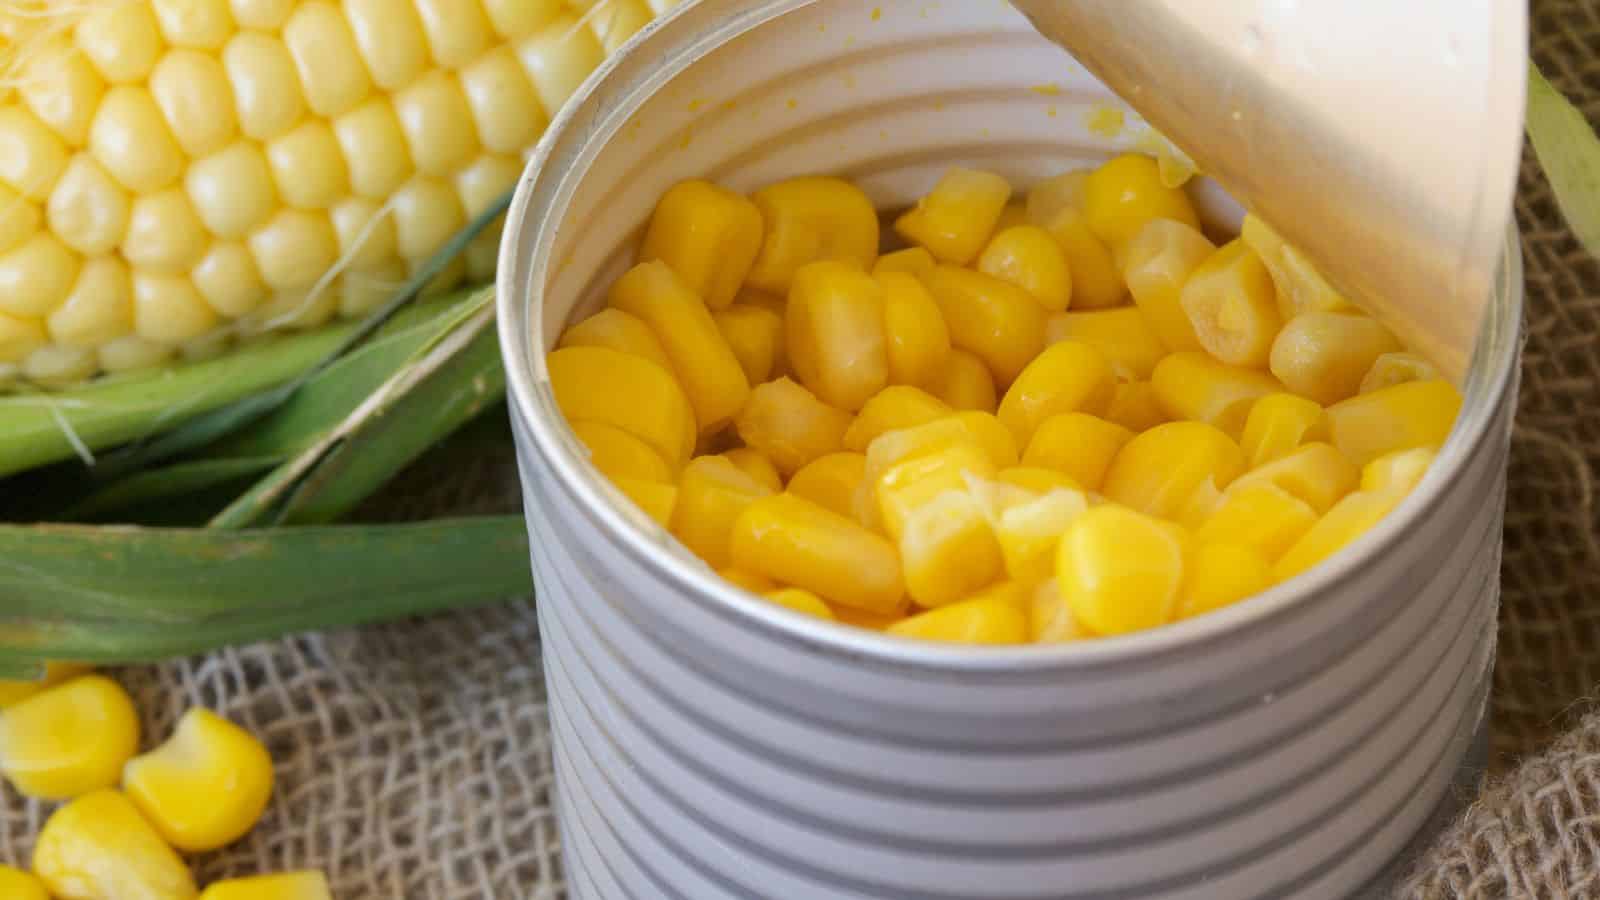 Close-up of an opened canned corn.